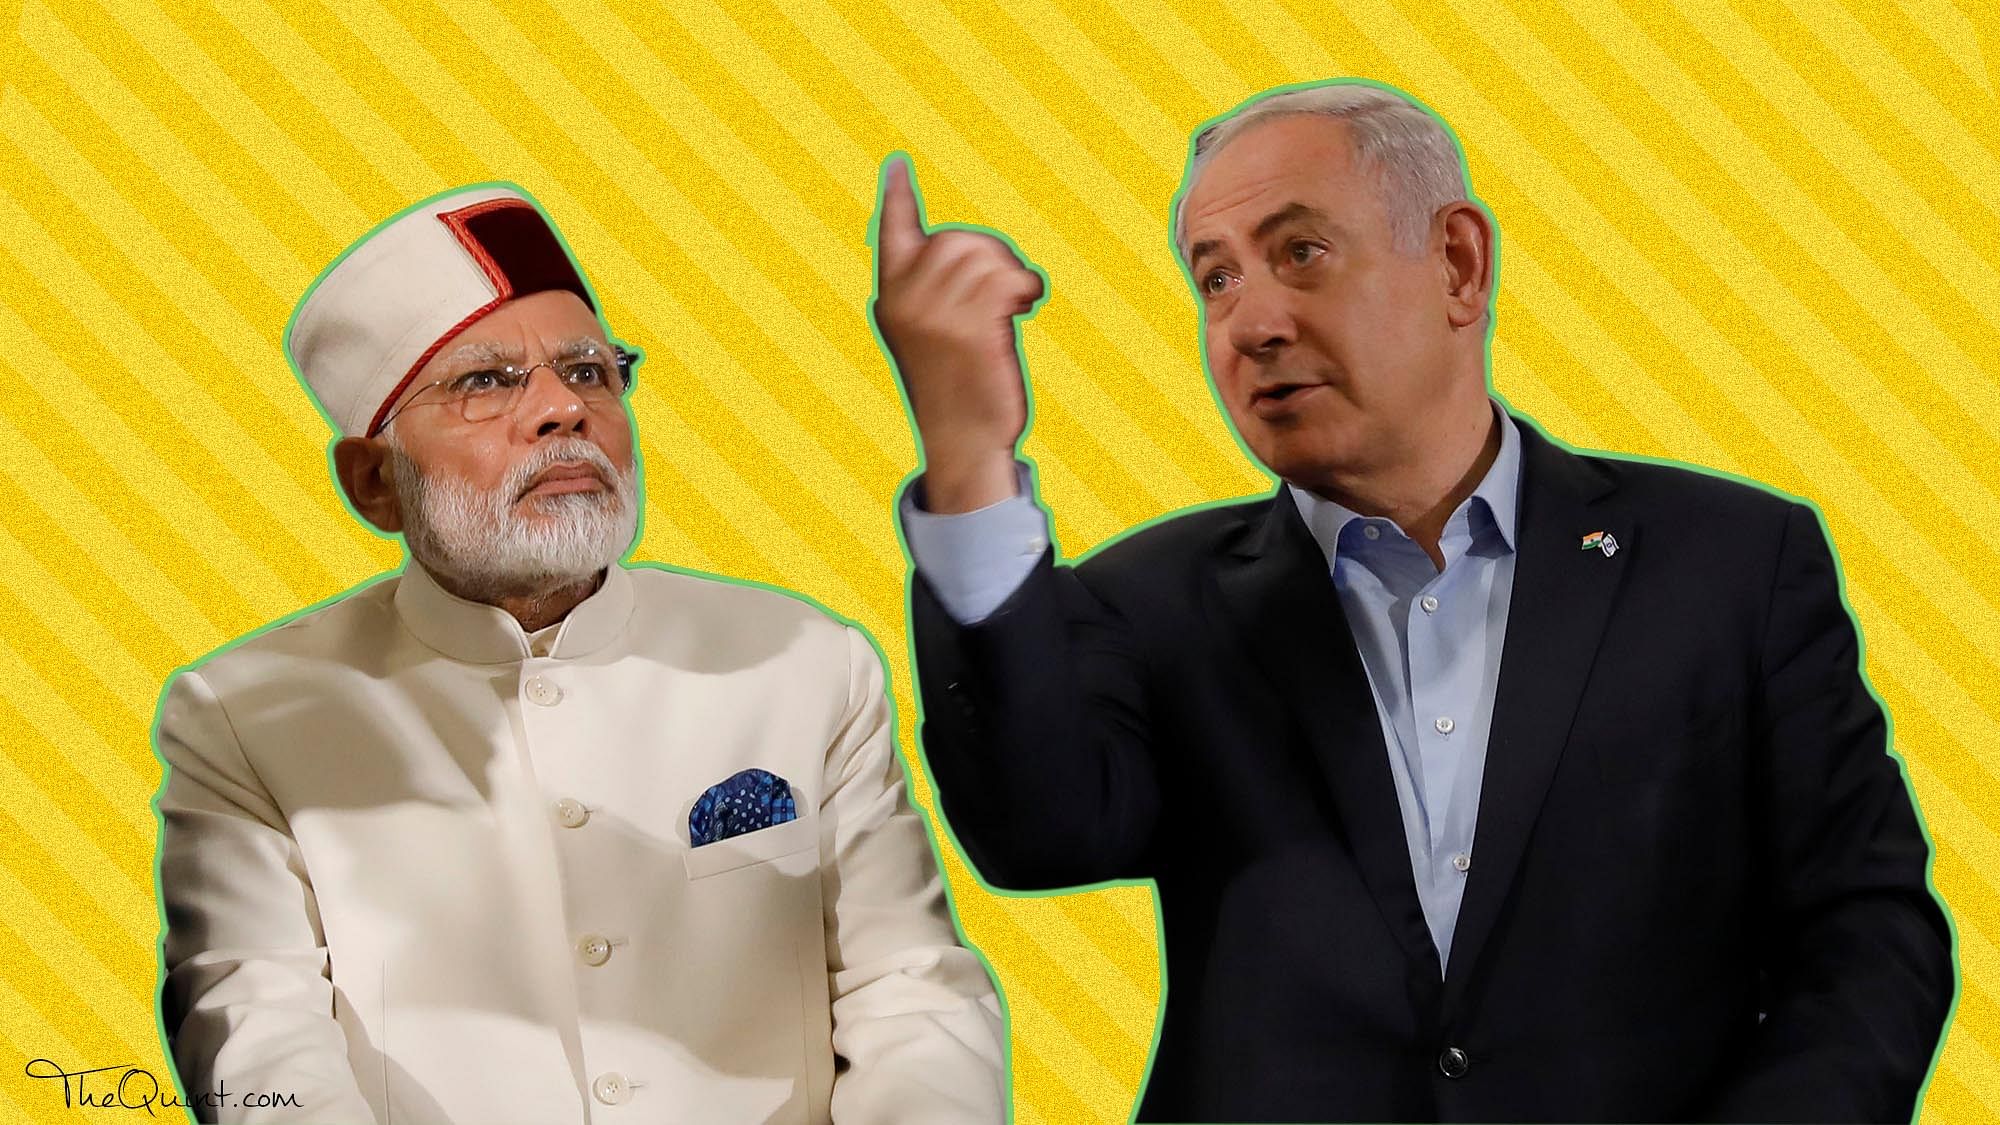 

Modi’s visit to Israel was marked by optics with few deliverables and marking India’s departure on Palestine policy.